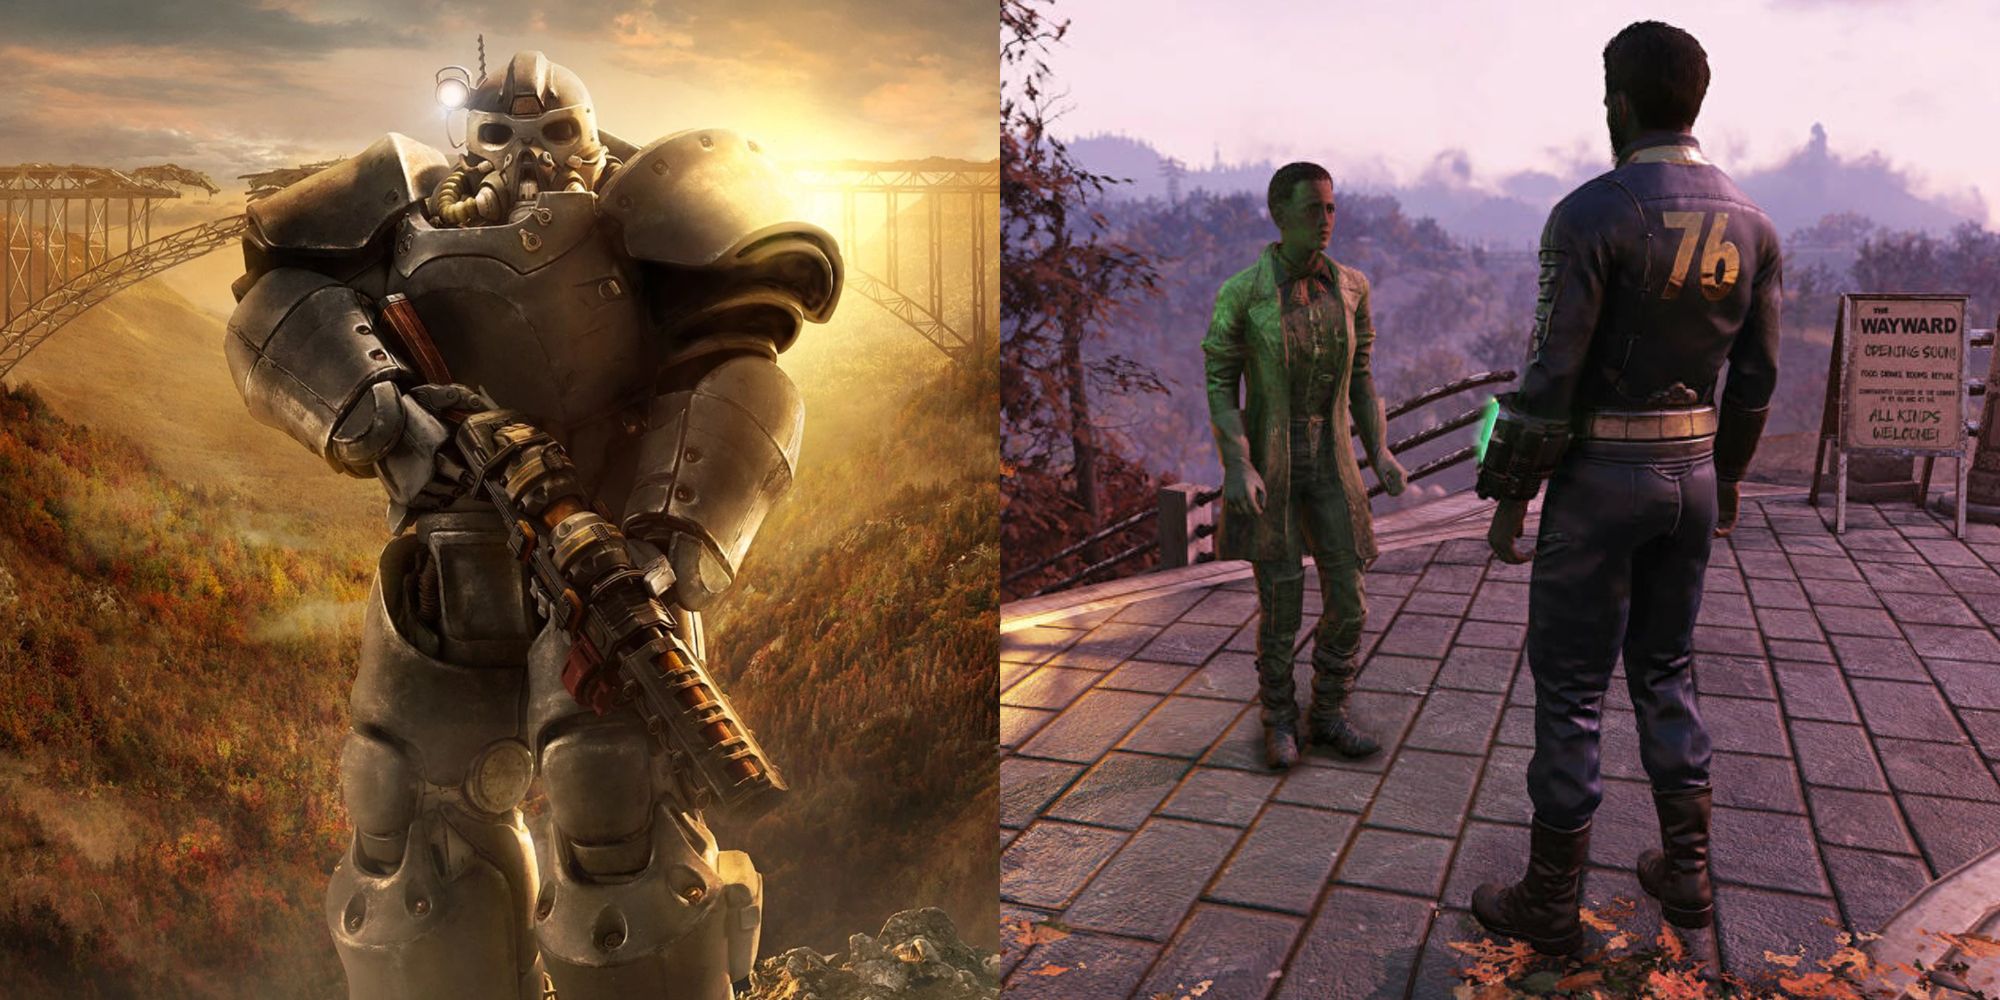 A split image of a soldier standing in Powered Armor from Fallout 76, and another photo of the player talking to an NPC in the open world